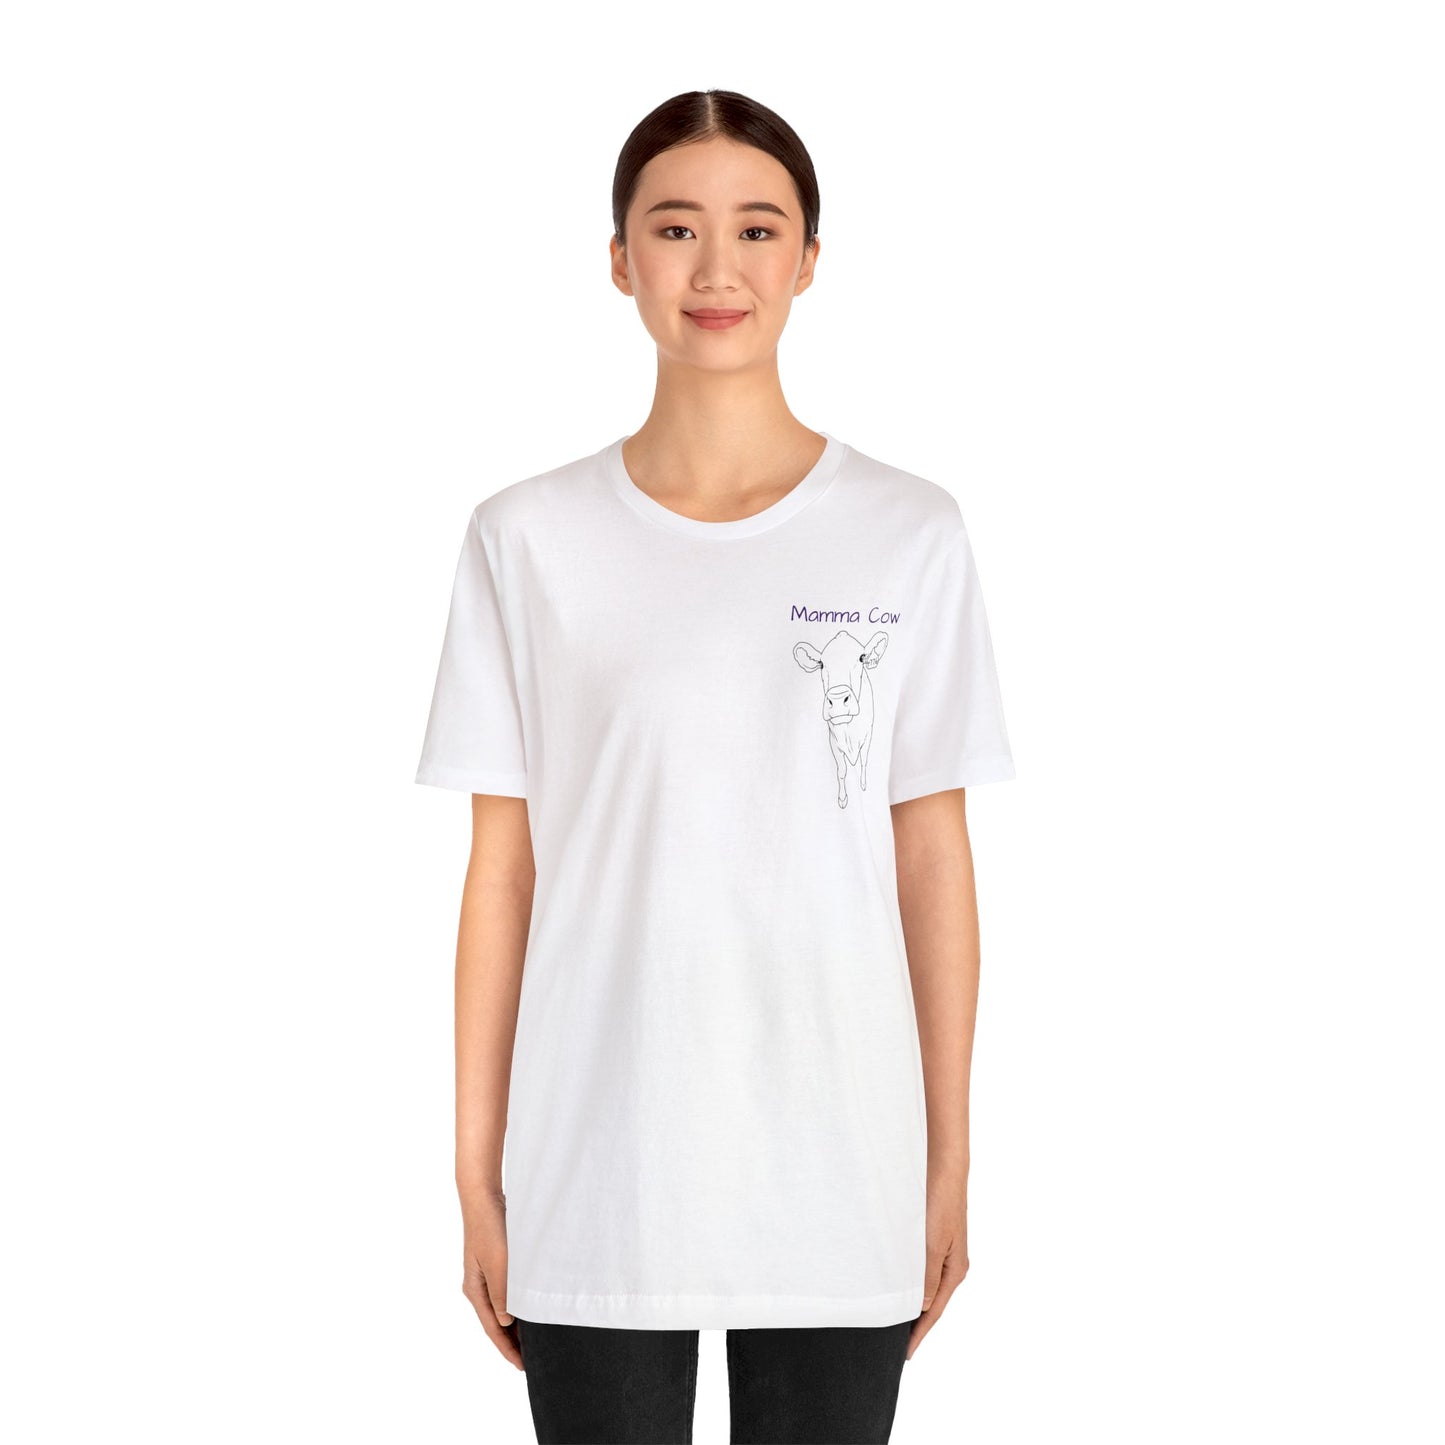 Country Girl Customs T-shirt with Mamma Cow outline